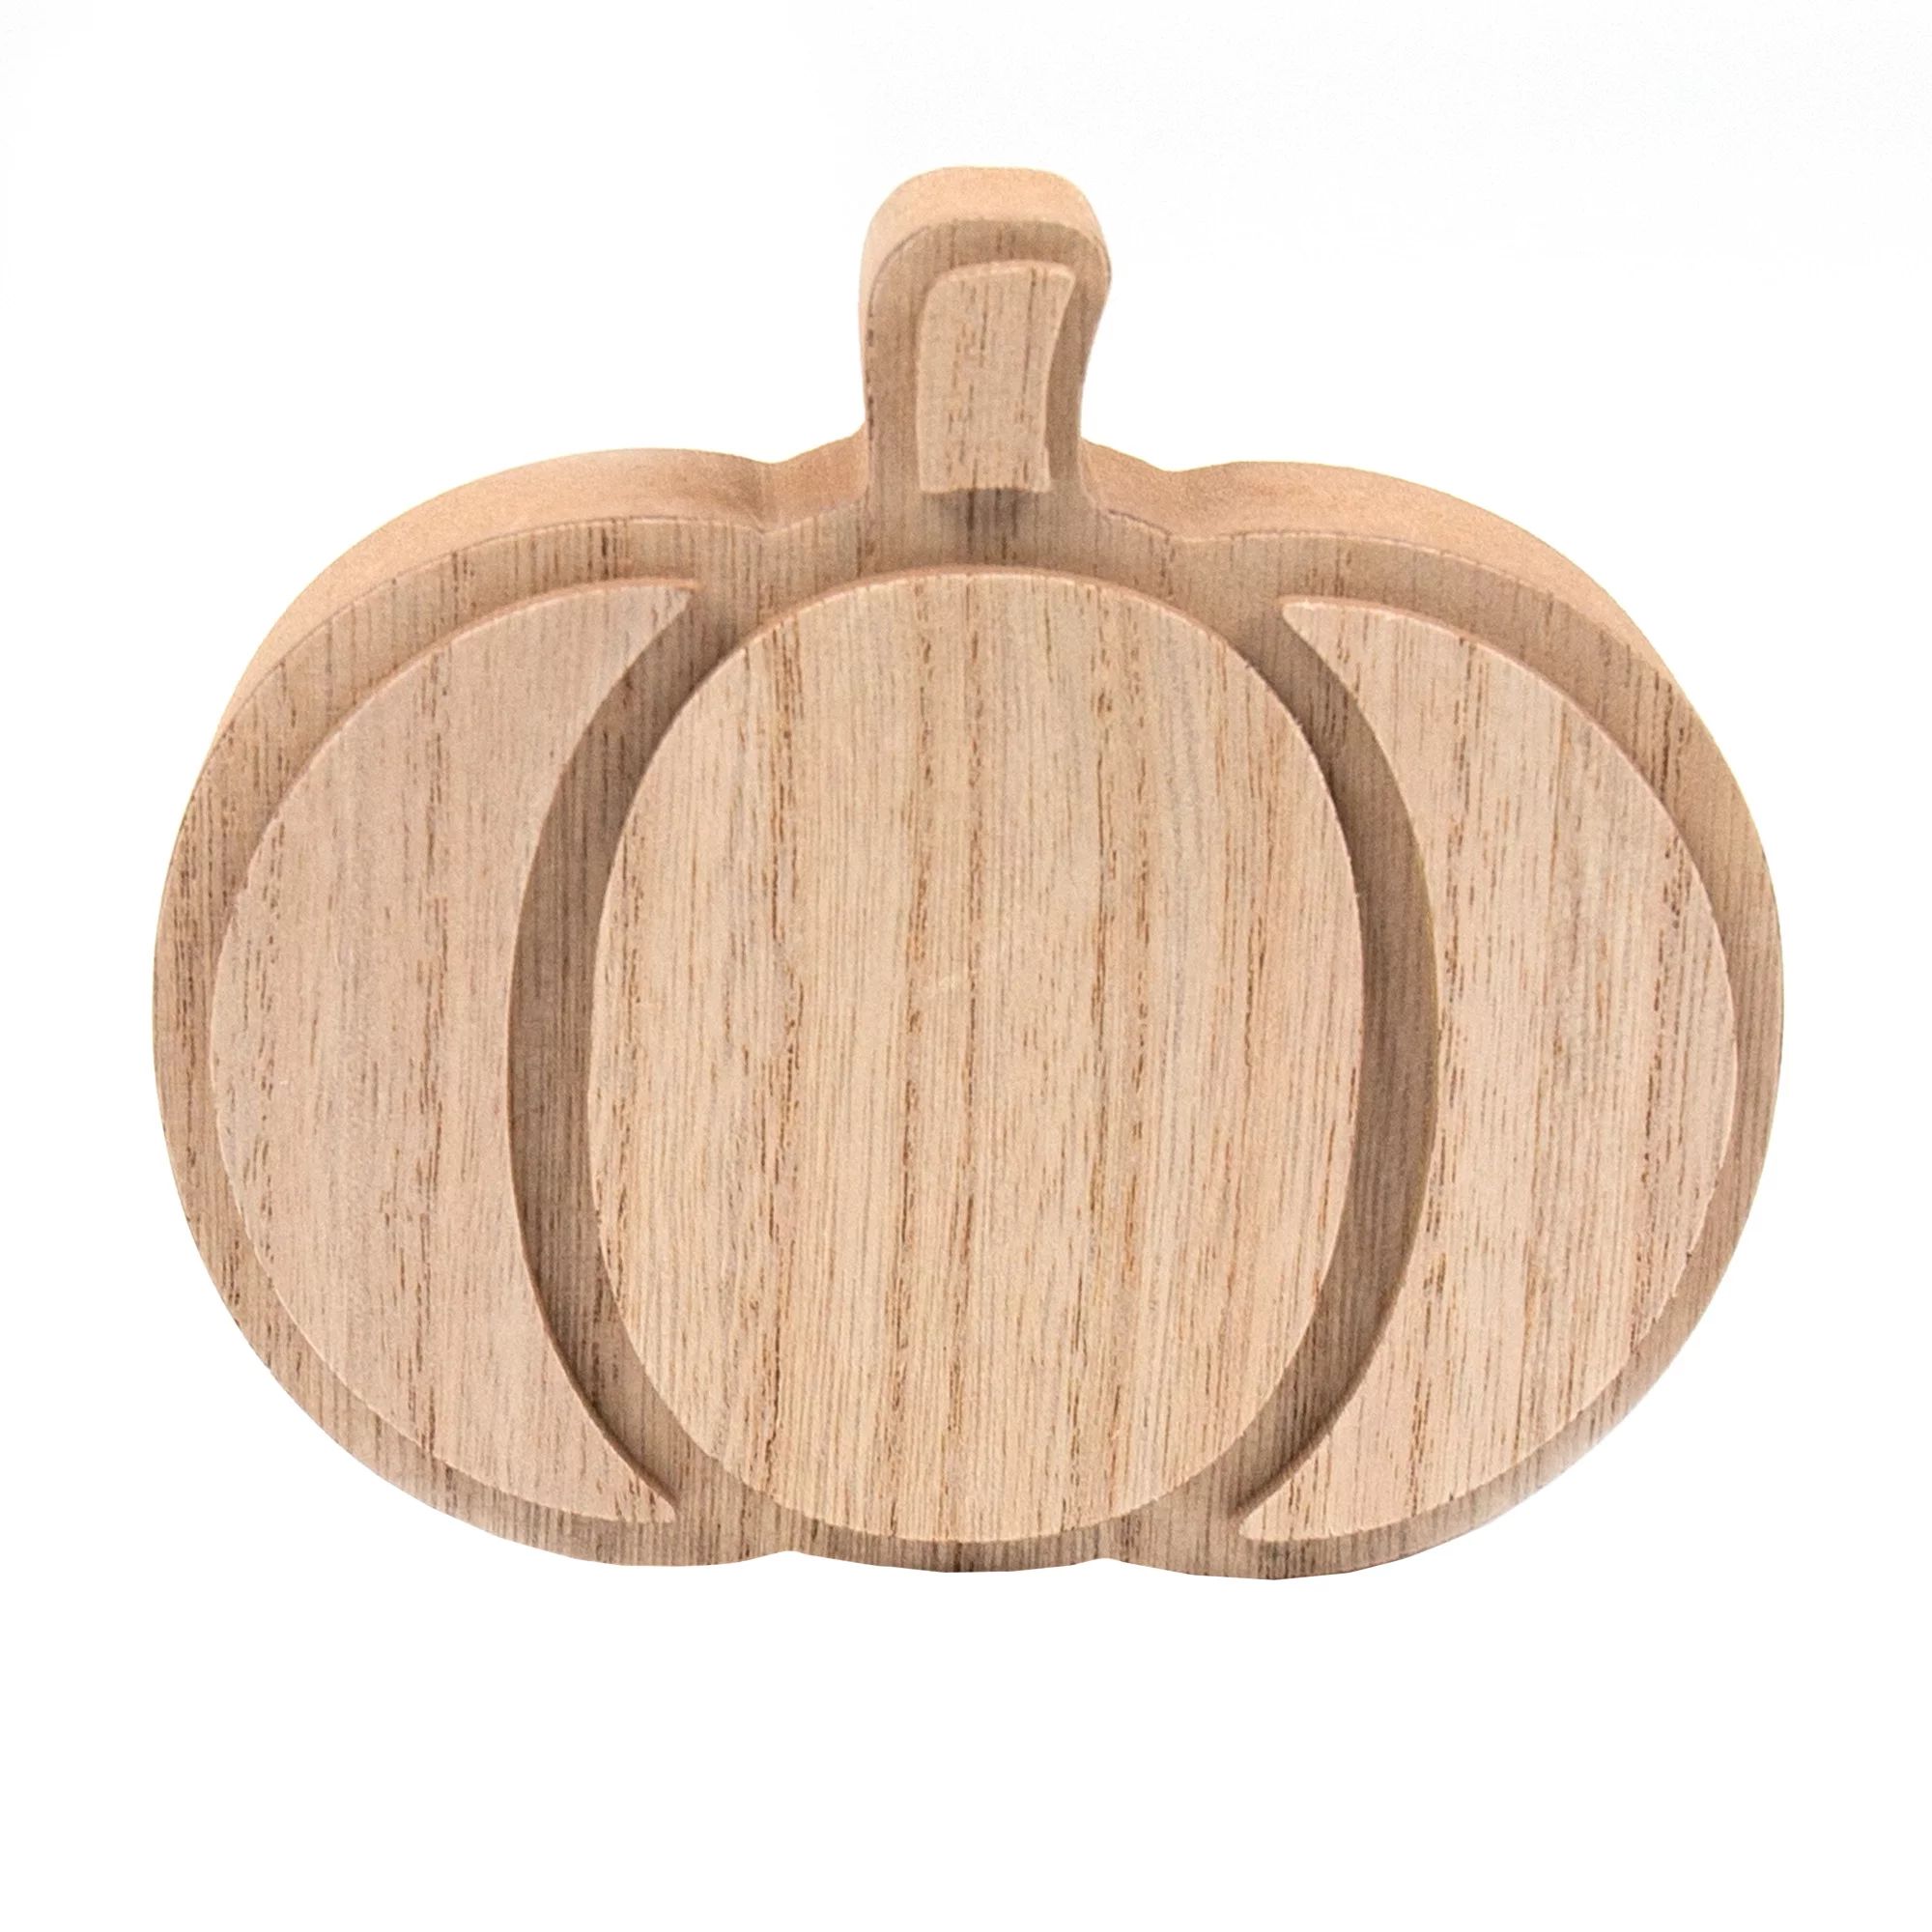 Natural Brown Wood Pumpkin Tabletop Decoration, 3.75" x 4.37", by Way To Celebrate | Walmart (US)